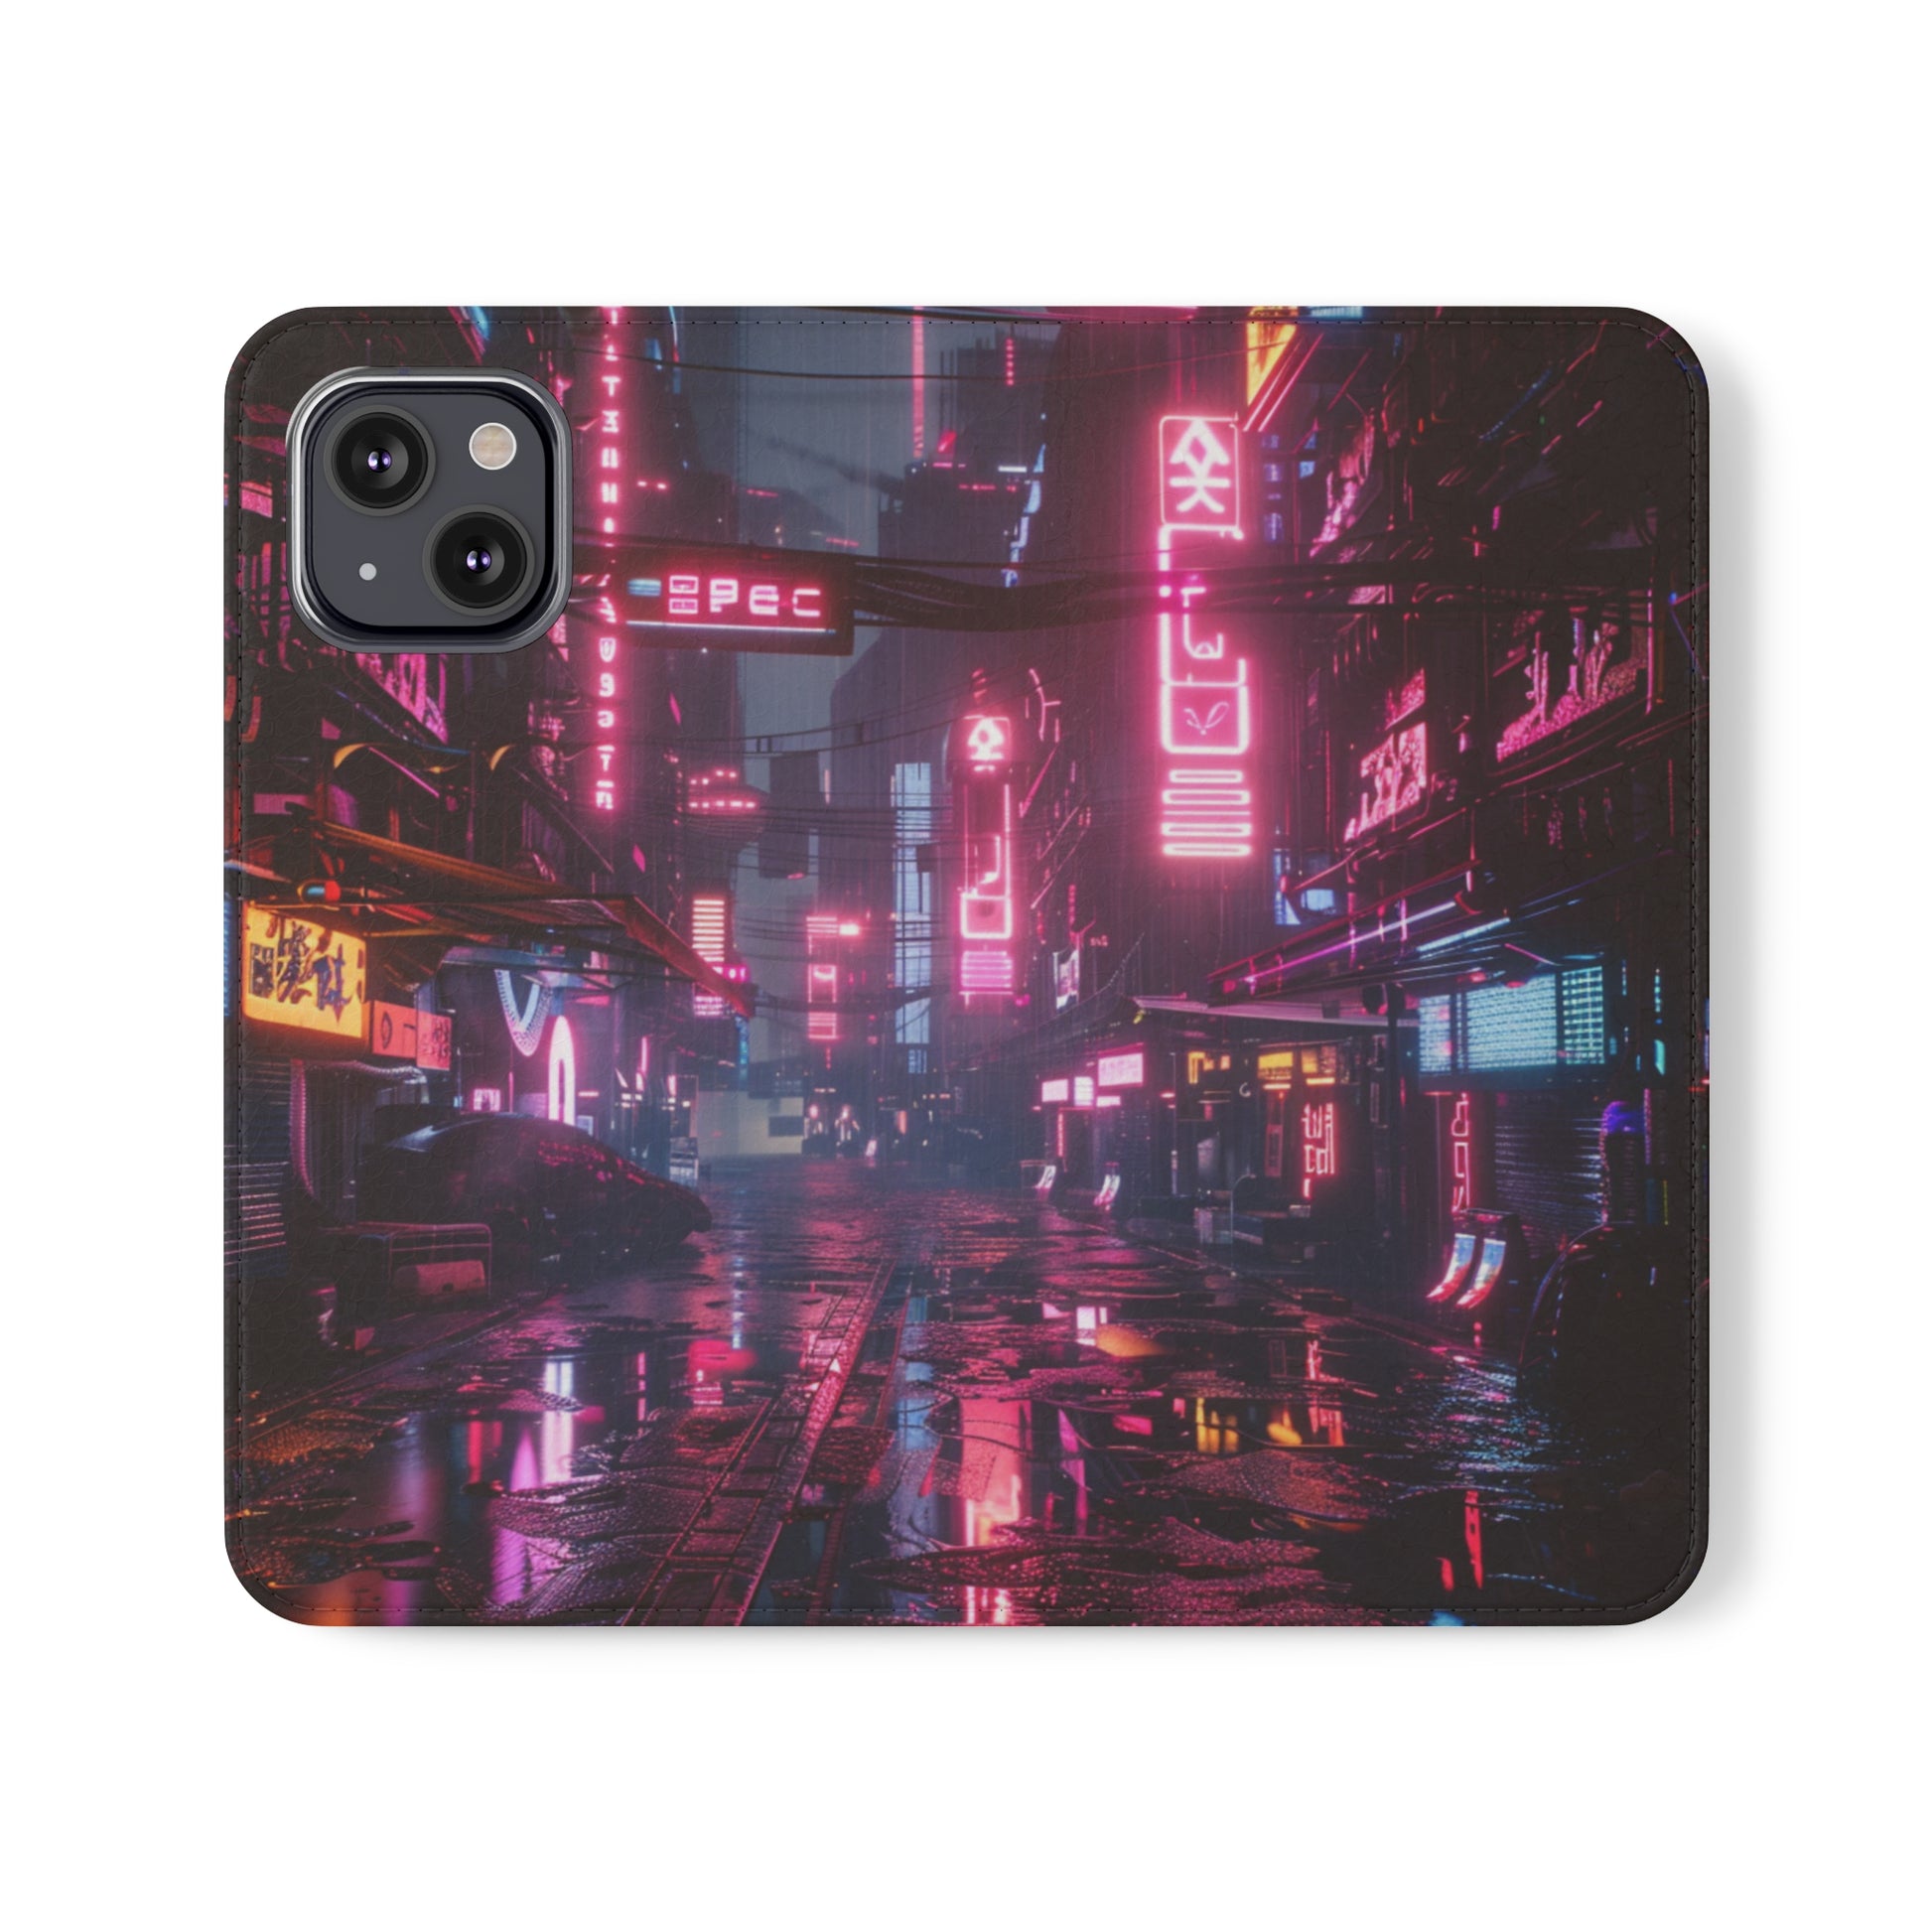 Cyberpunk city night wallet case for iPhone 13